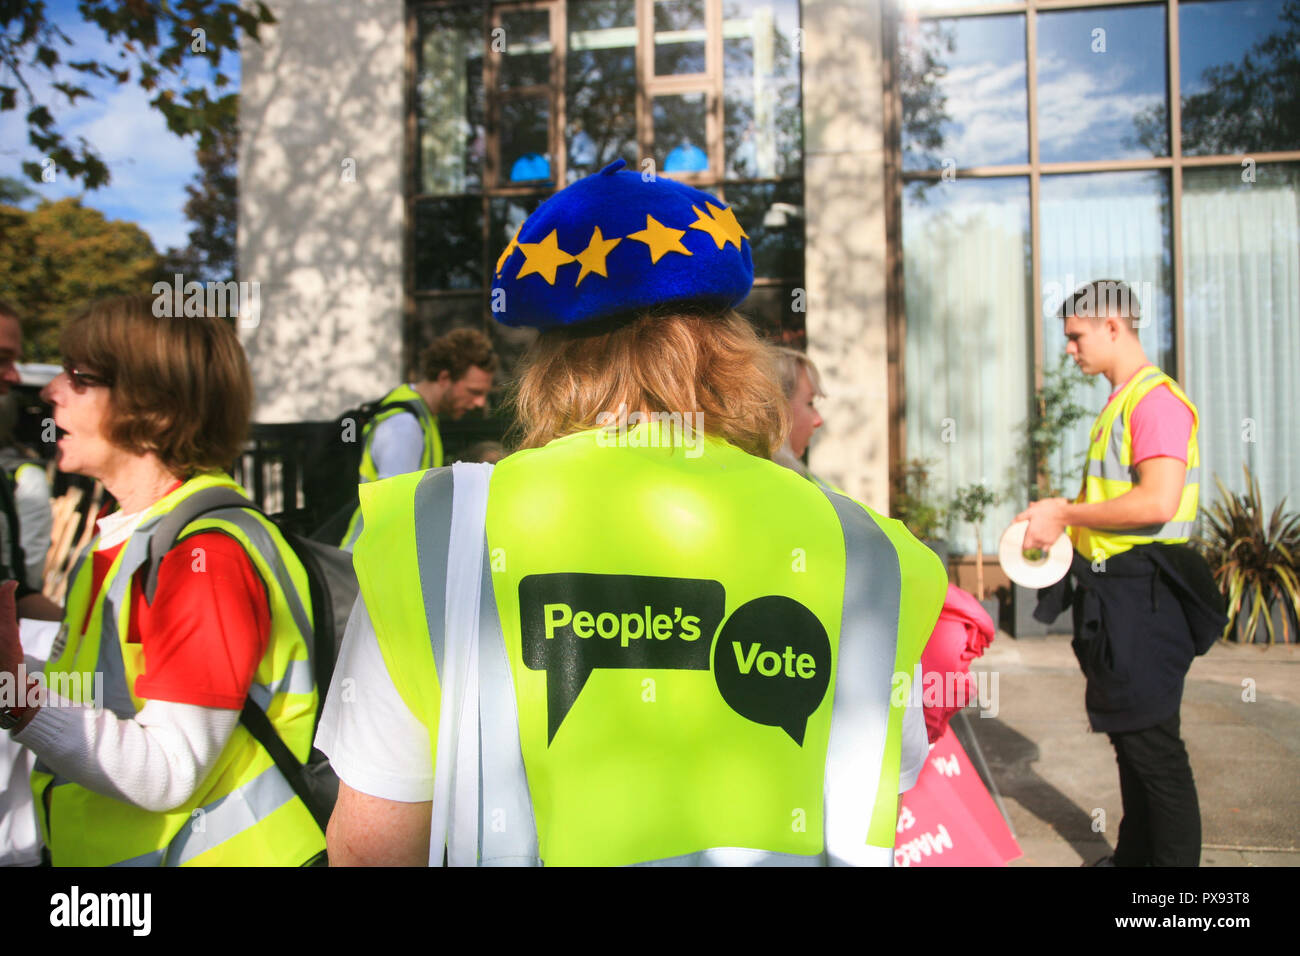 London, UK. 20th Oct, 2018. Thousands of Pro Europe campaigners marched through central London to Parliament demanding a vote on the final Brexit deal on Britain leaving European Union as more than 100,000 are expected at the rally.Peoples Vote is a grassroots movement supported by European Movement UK, Open Britain, Britain for Europe and Scientists for EU. Credit: amer ghazzal/Alamy Live News Stock Photo